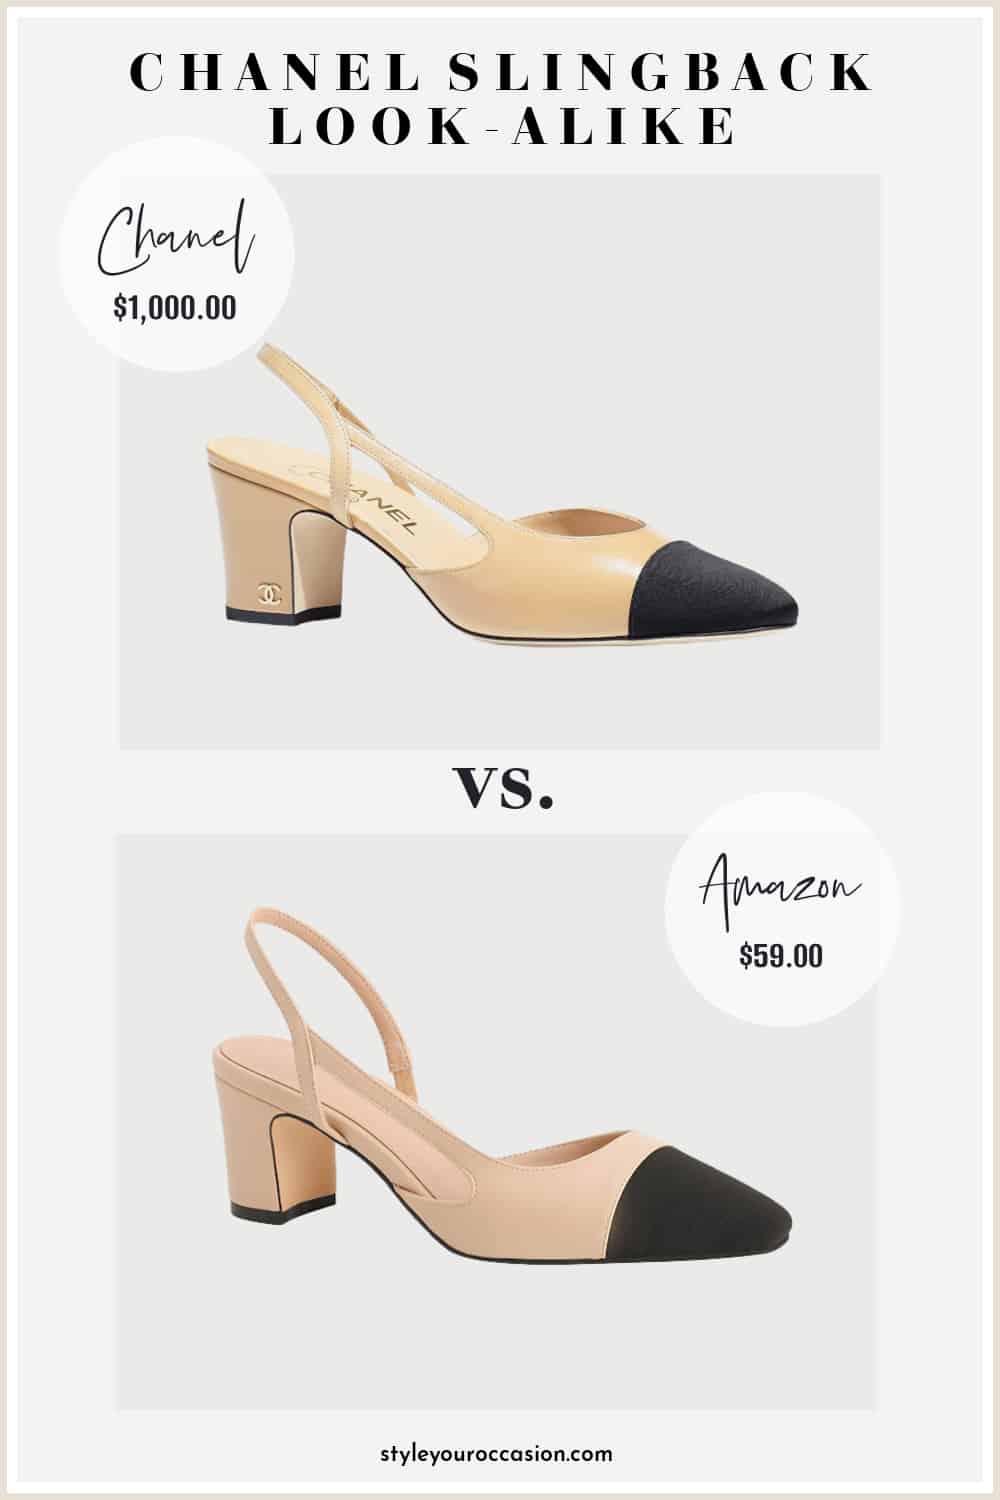 image comparing a beige Chanel slingback pump with a look-alike shoe